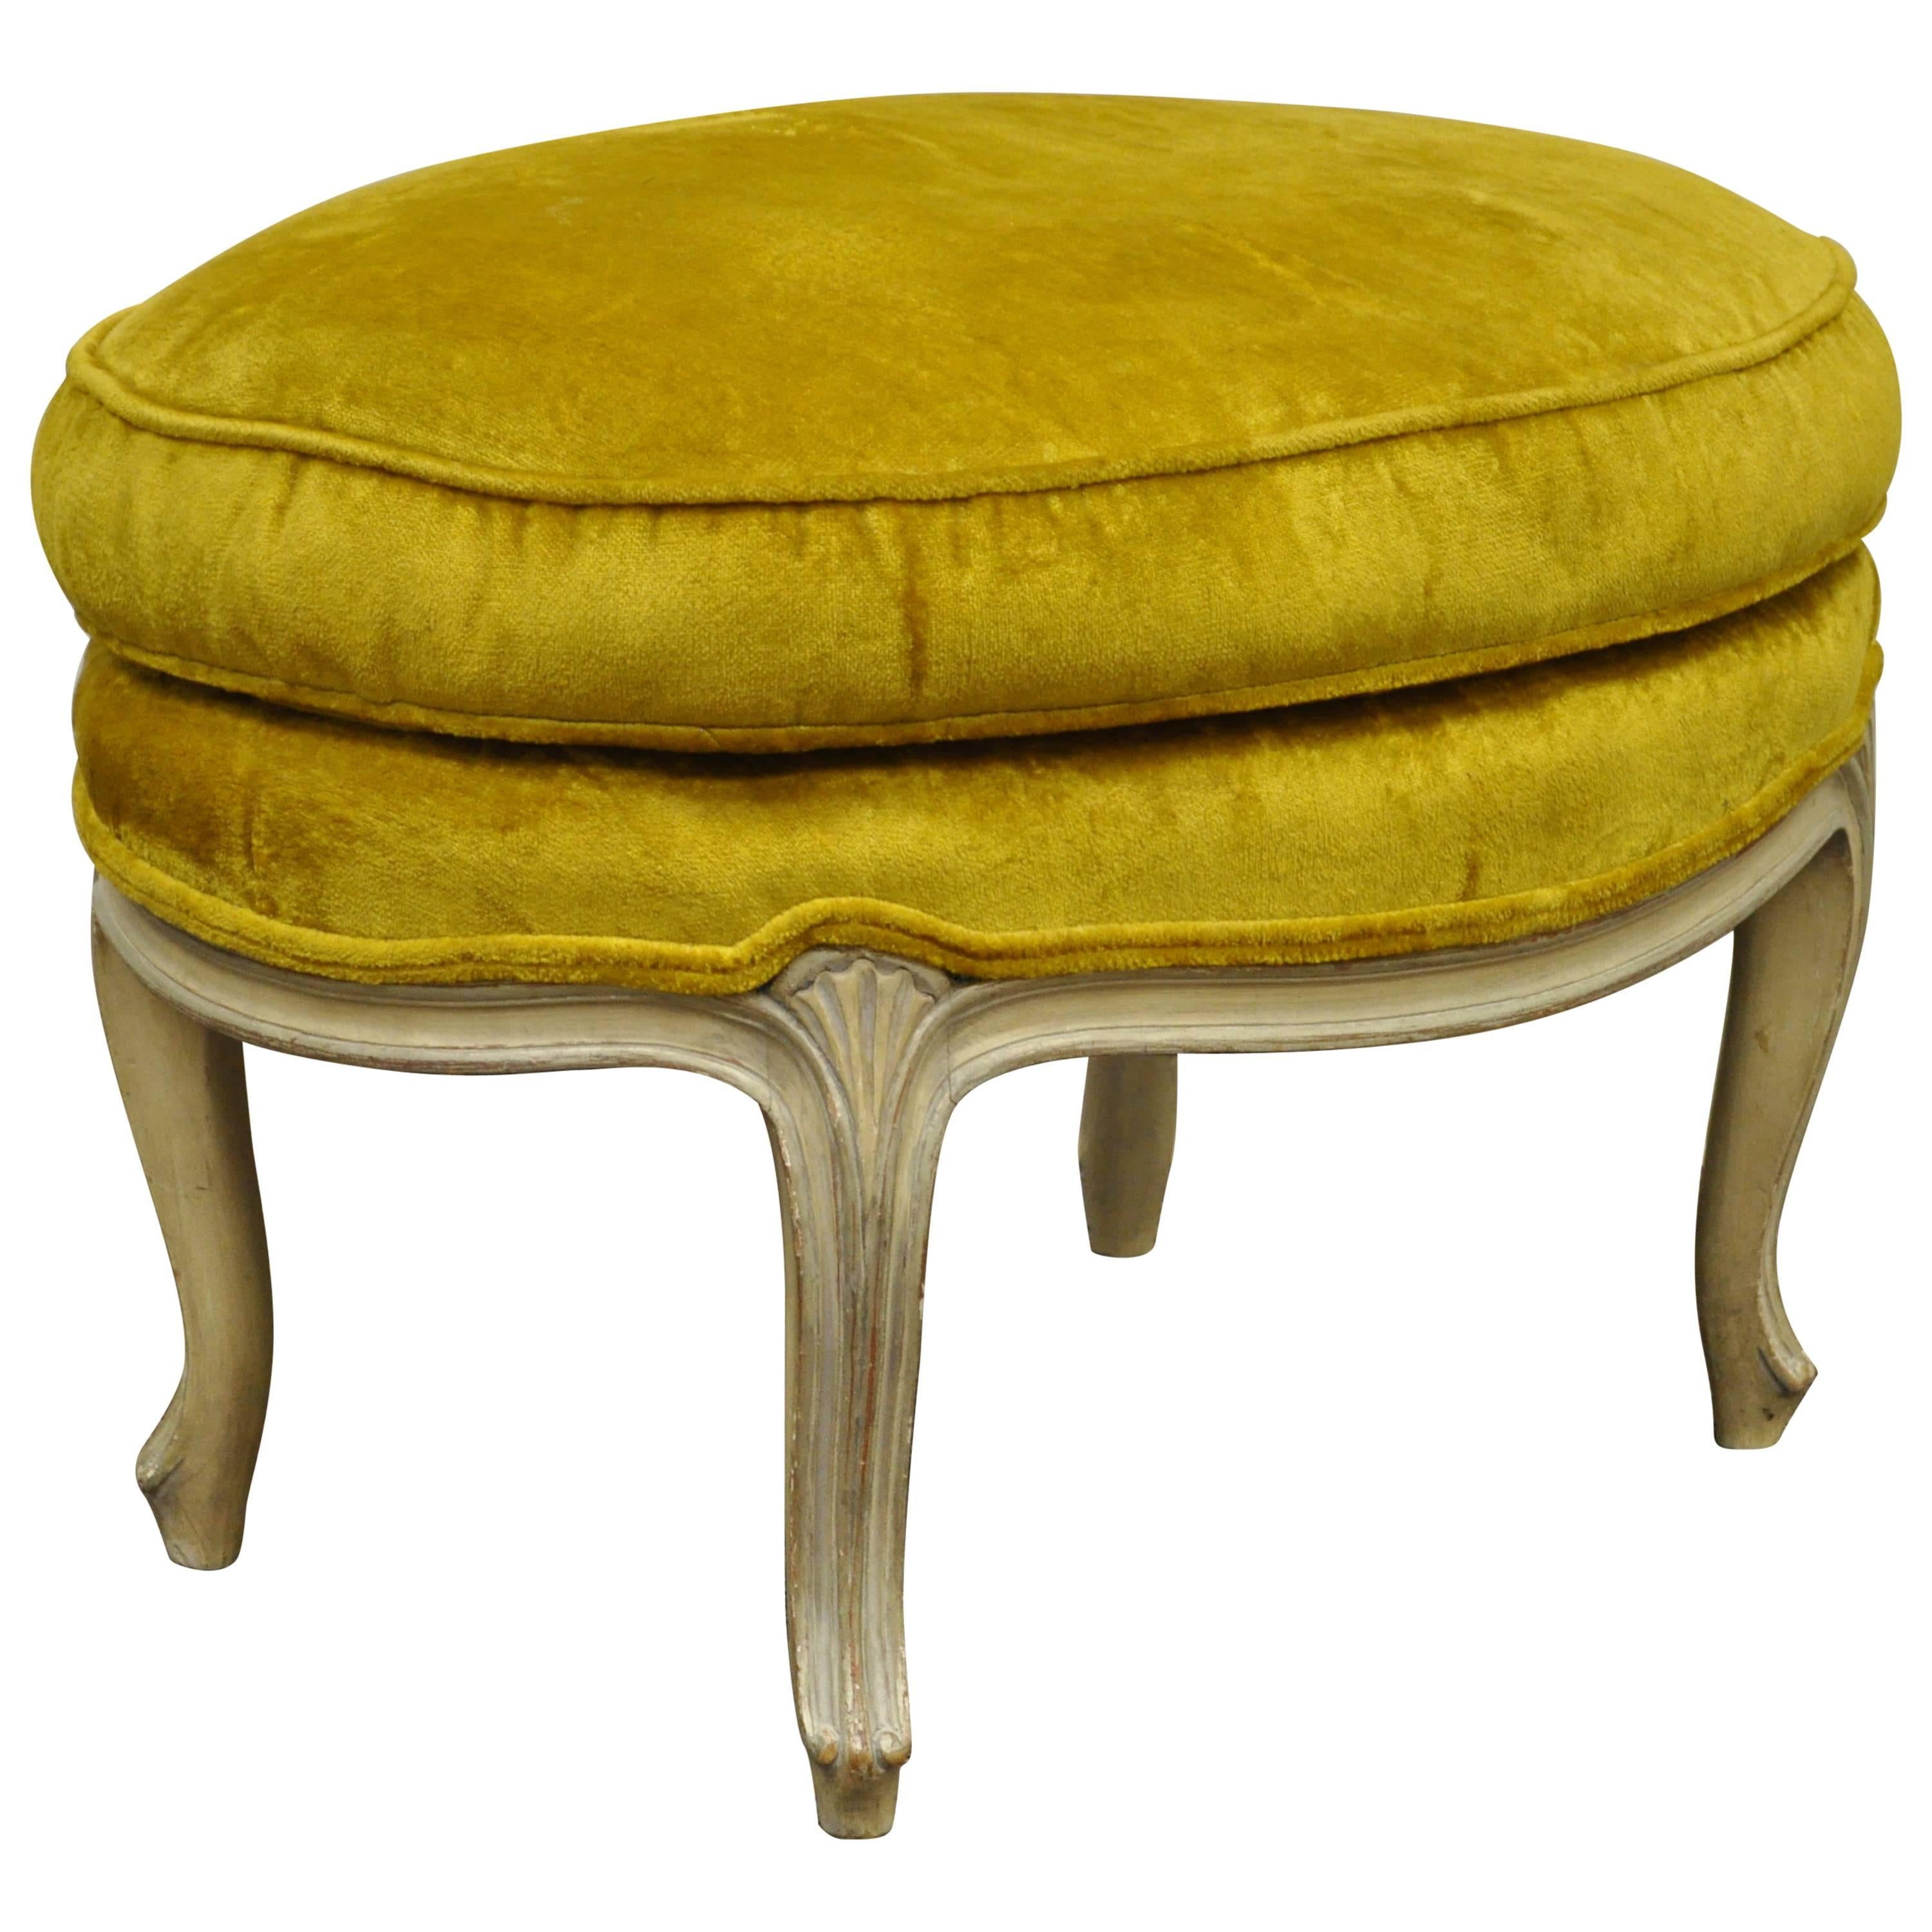 Vintage French Louis XV Style Cream Painted Overstuffed Ottoman Oval Footstool